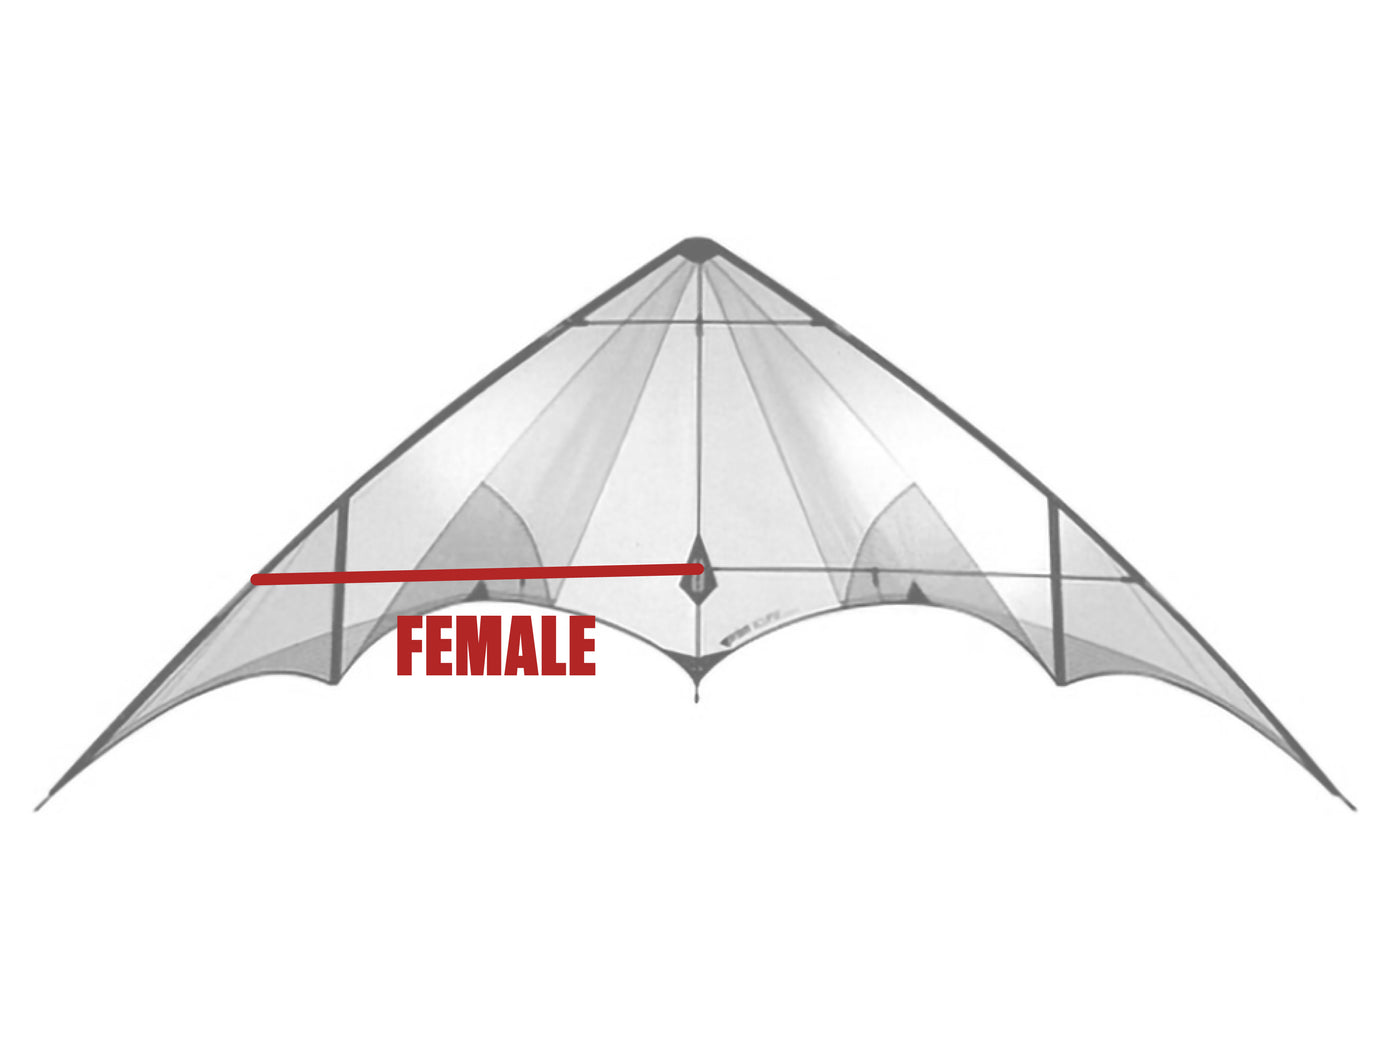 Diagram showing location of the Eclipse Vented Lower Spreader (Female) on the kite.